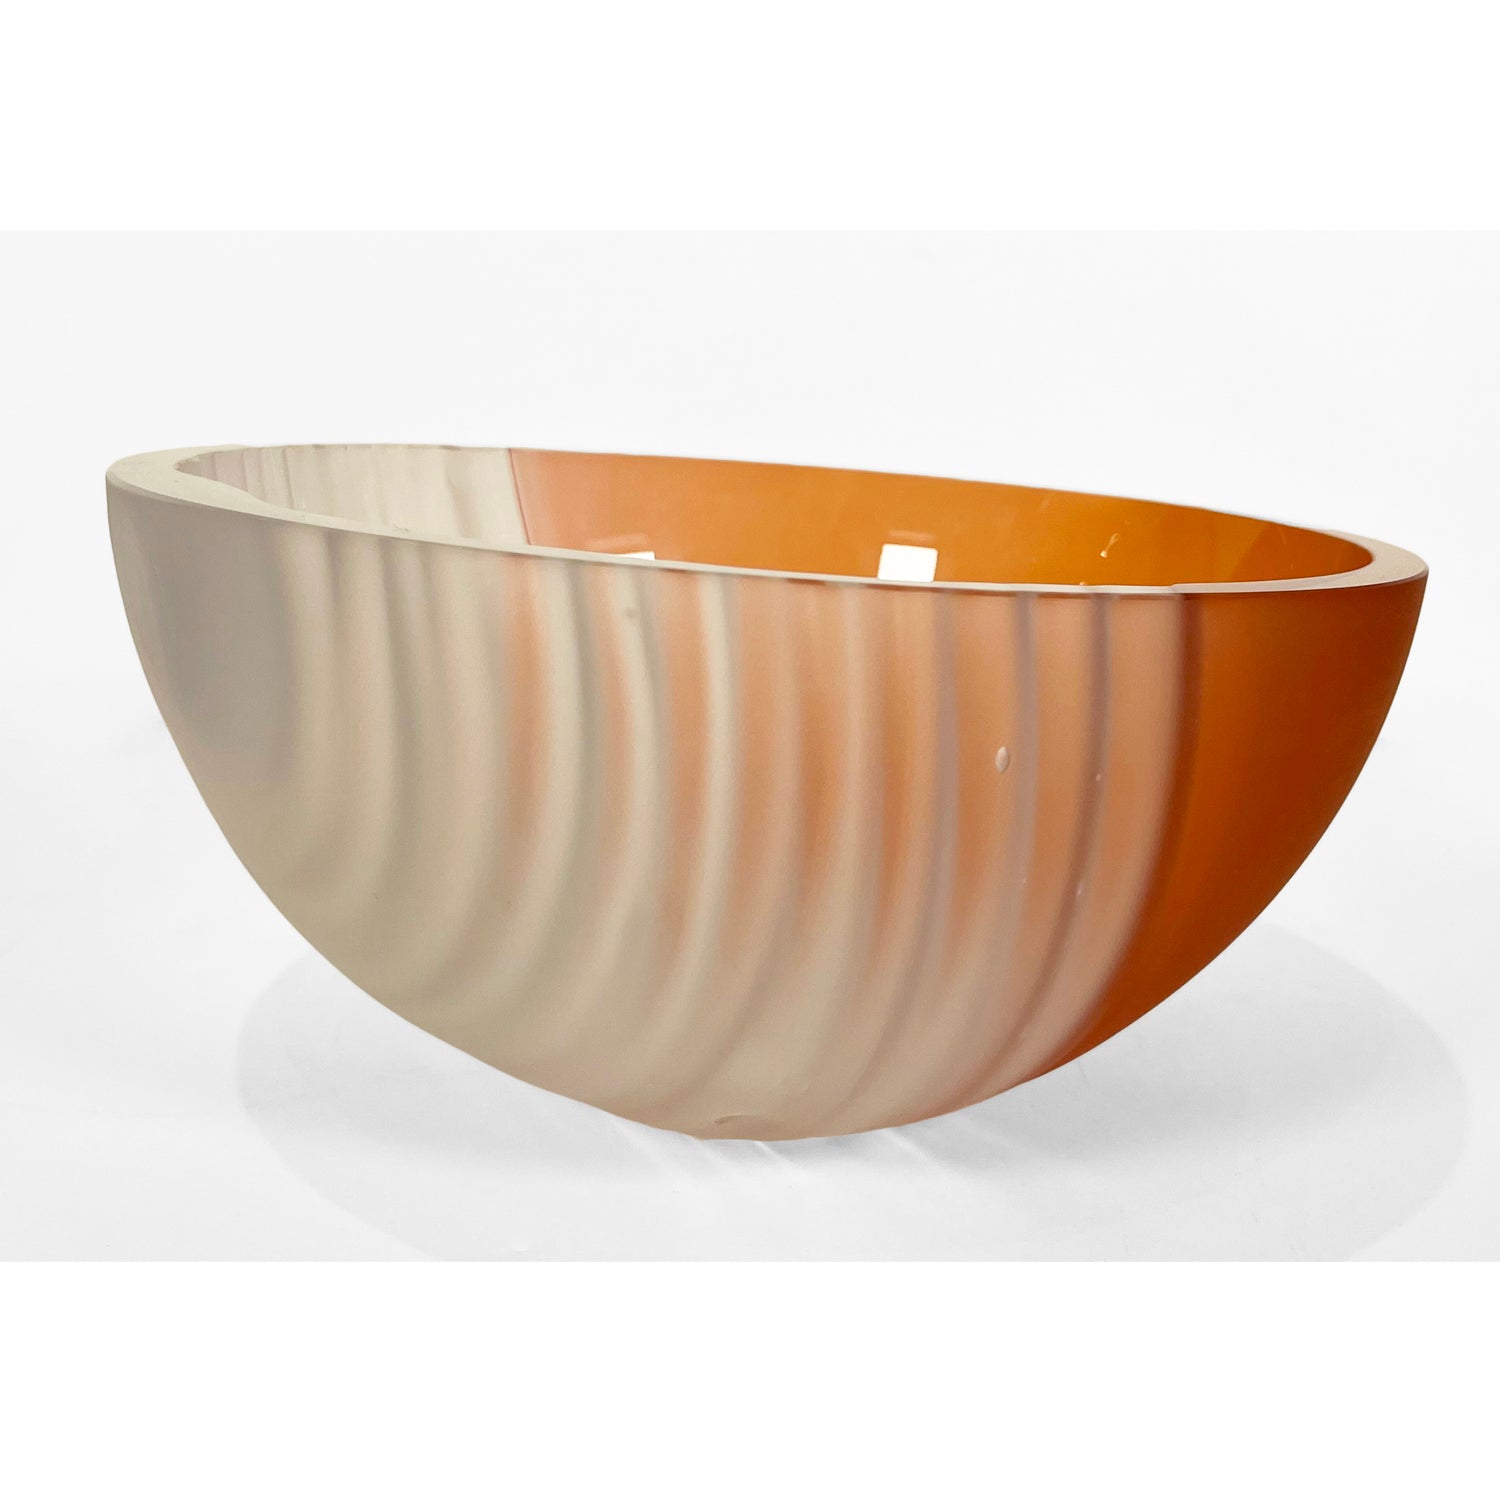 Jaan Andres - Axis Bowl Apricot Large, 5" x 9" x 9"